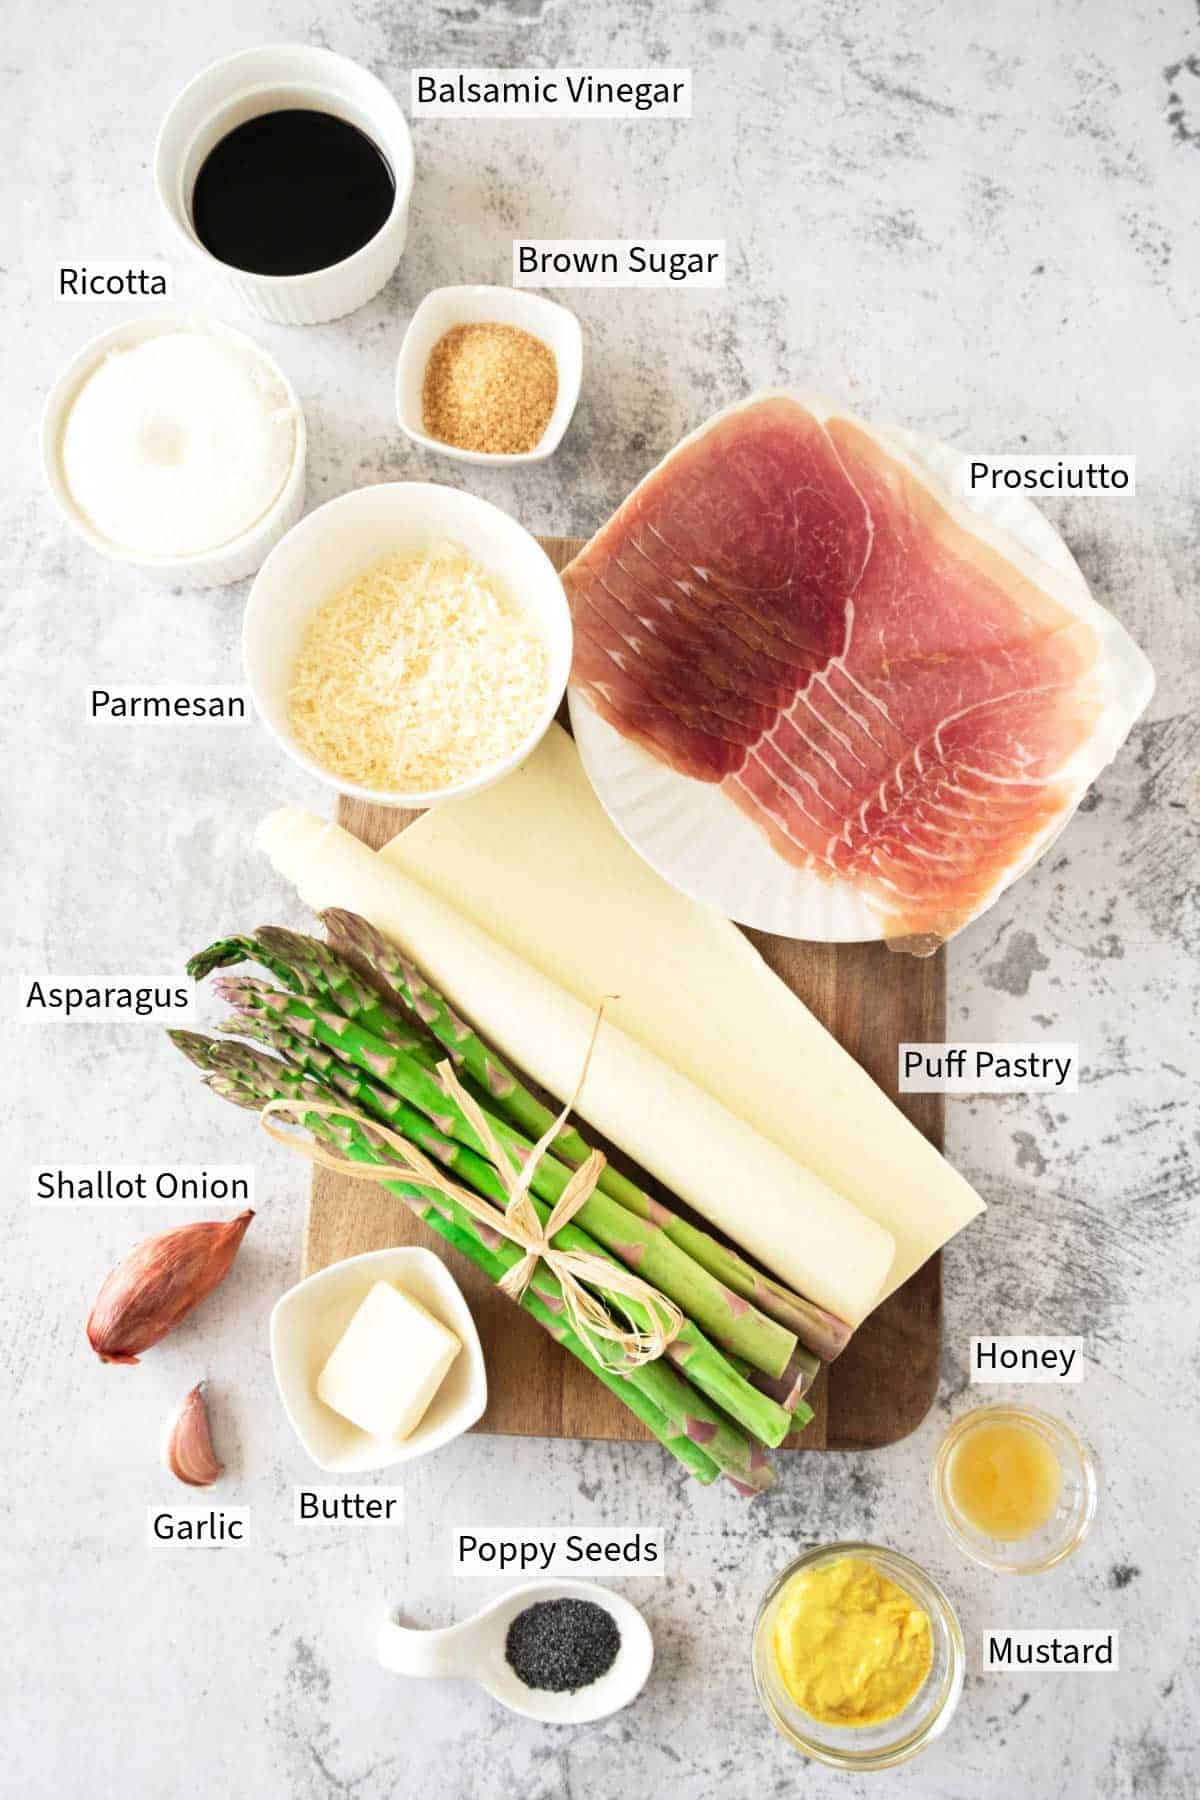 Ingredients for a asparagus tart recipe laid out on a table, including puff pastry, prosciutto, asparagus, and various condiments and cheeses.